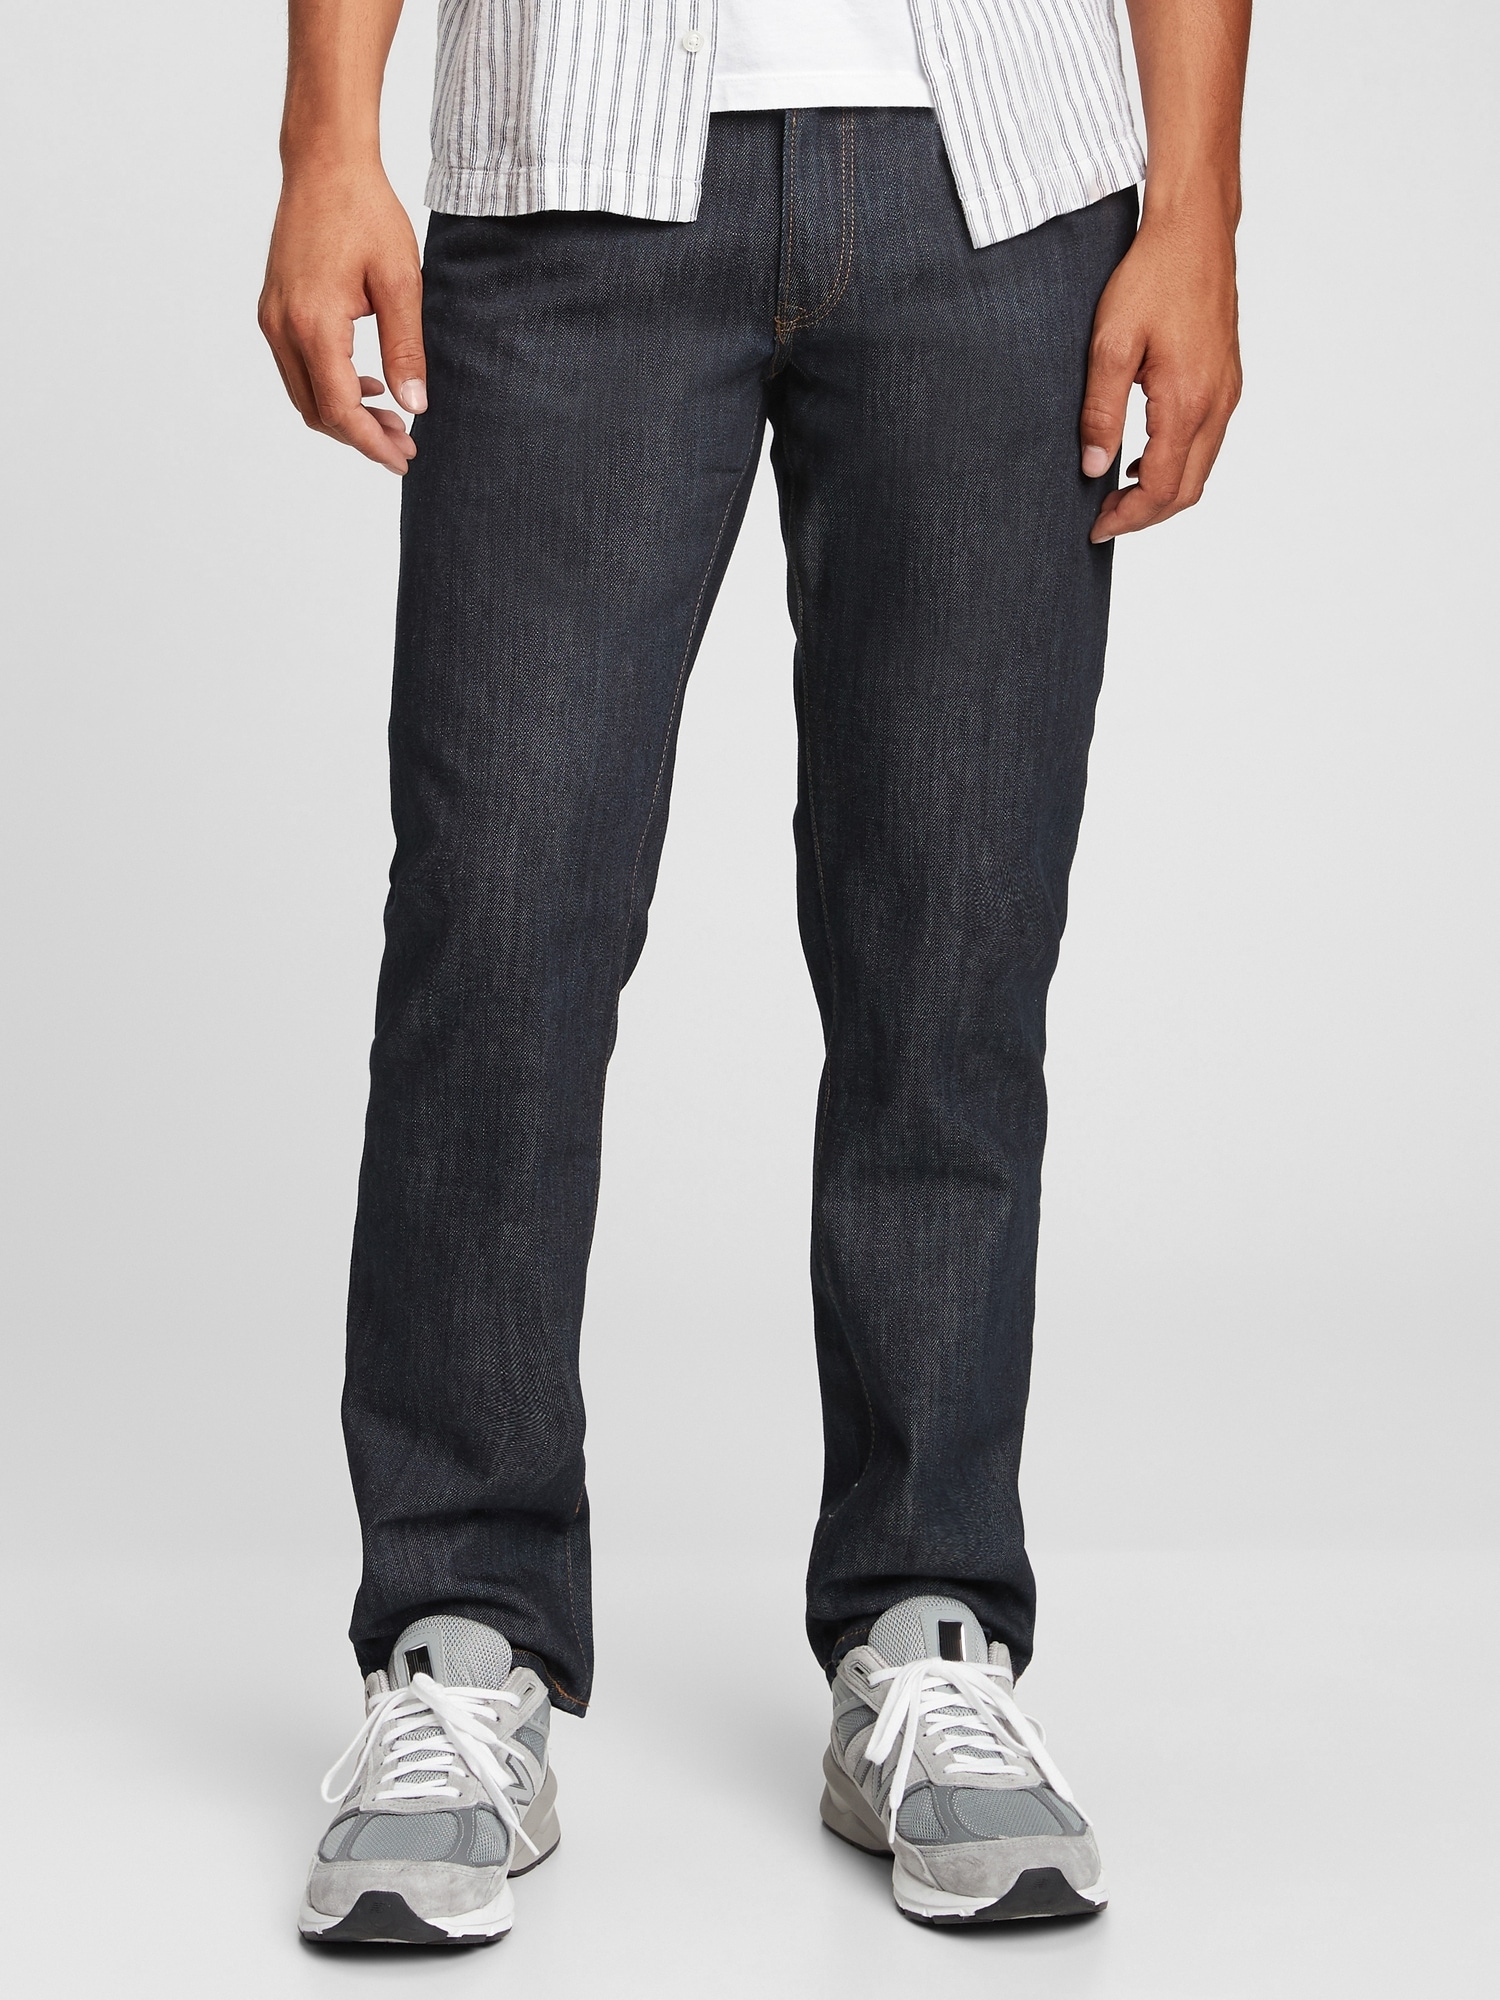 Gap Solid Gray Jeans 30 Waist - 76% off